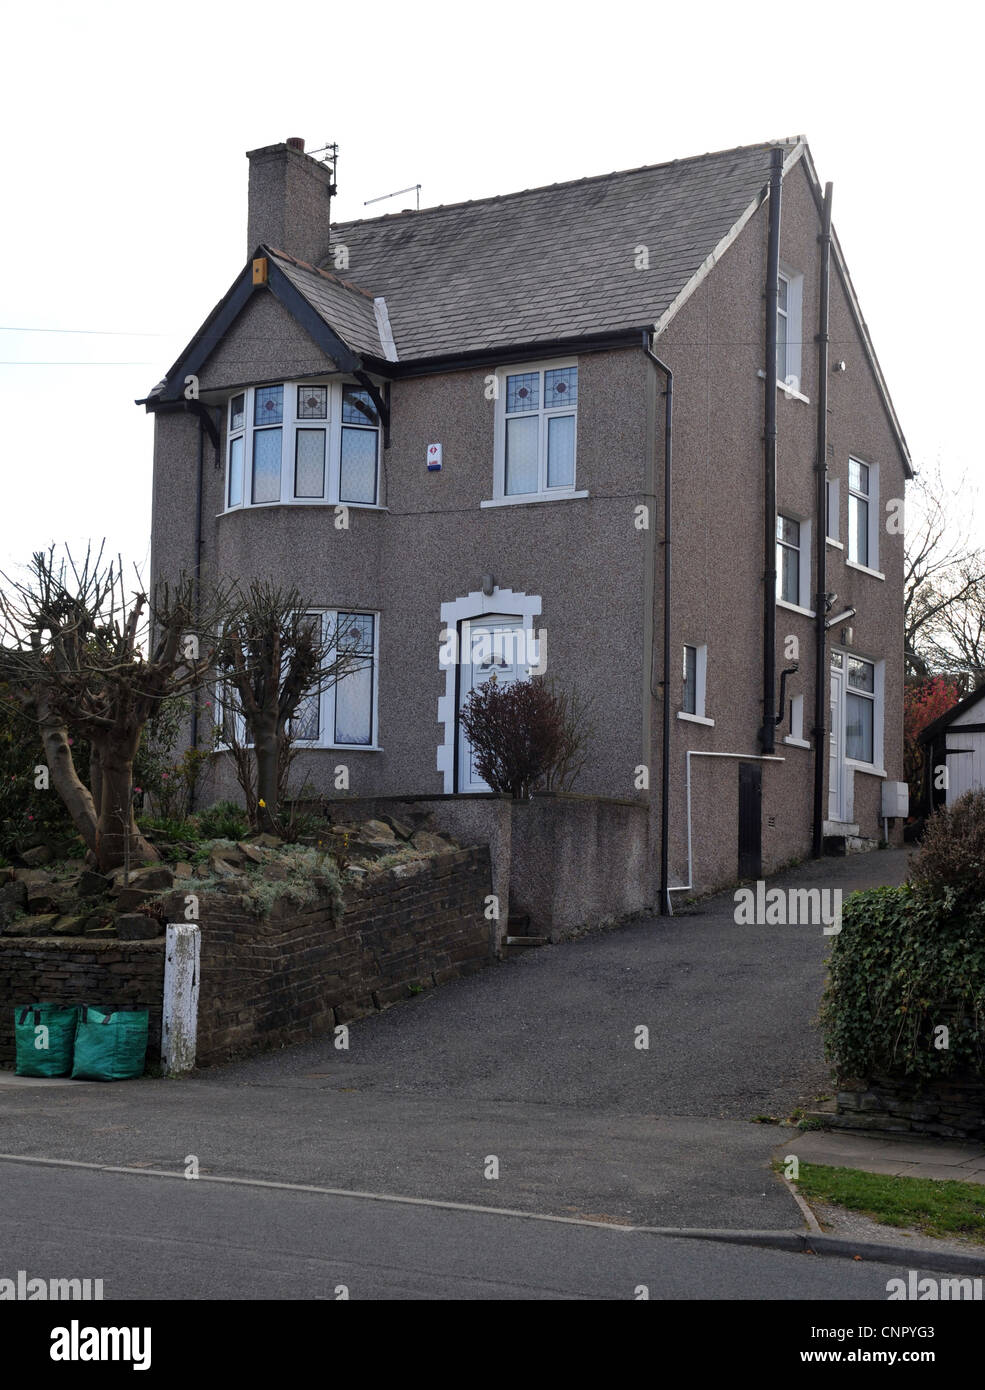 The former marital home of Peter Sutcliffe, the Yorkshire Ripper in Garden Lane, Heaton, Bradford. The house is now inhabited by Stock Photo